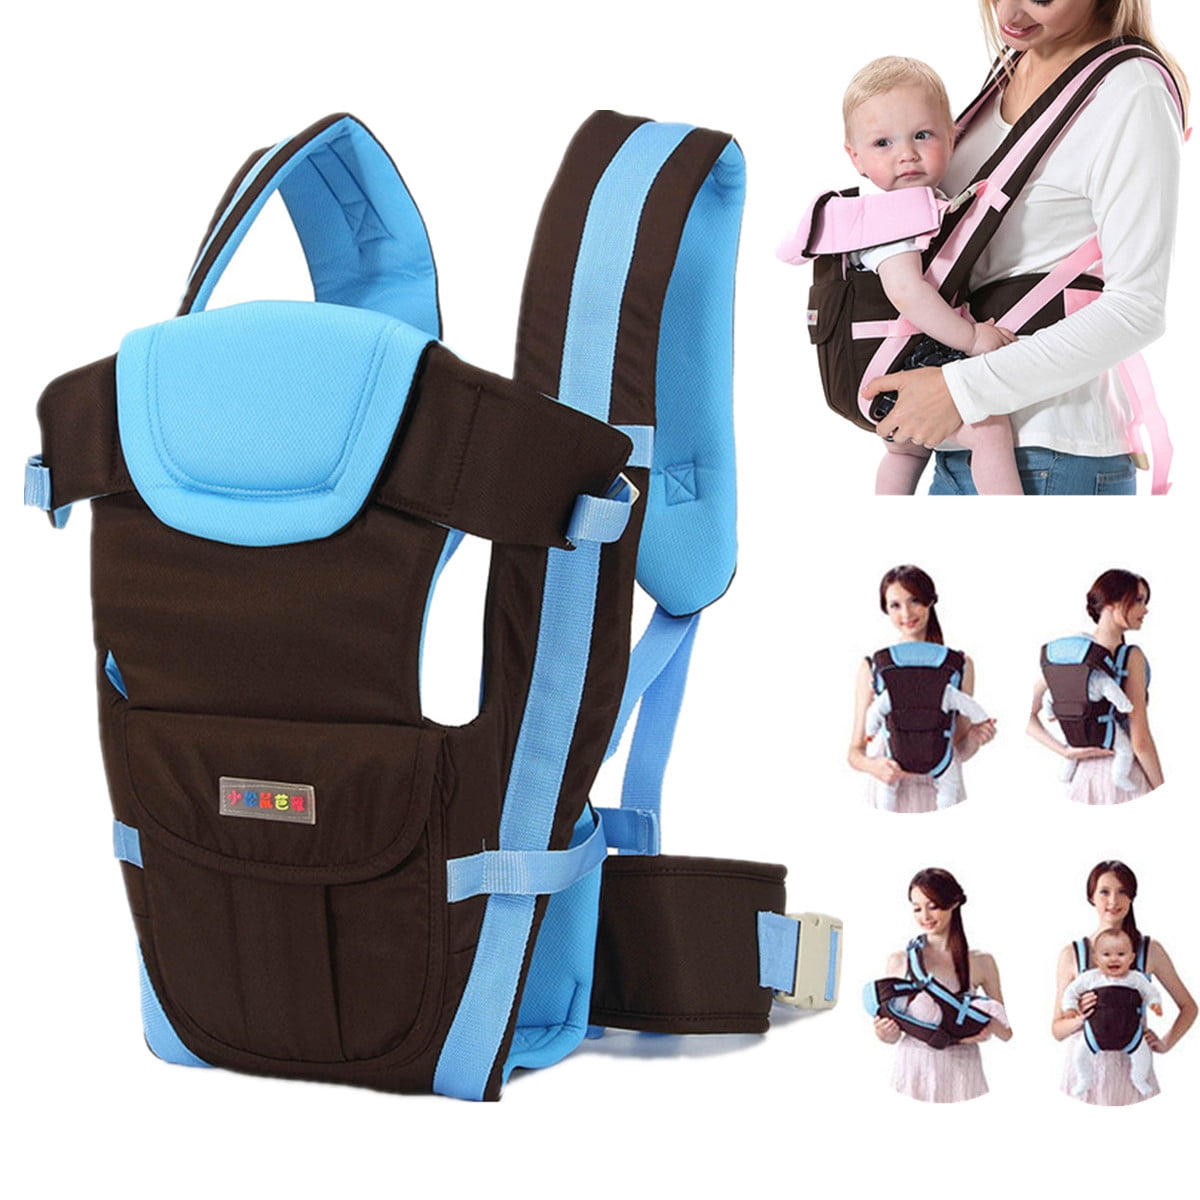 Flip Front 2 Back Baby Carriers,Soft Carrier for Summer Newborn Toddler HipSeat Infant Child Backpack Carrier Easy Comfortable Positions Extendable 